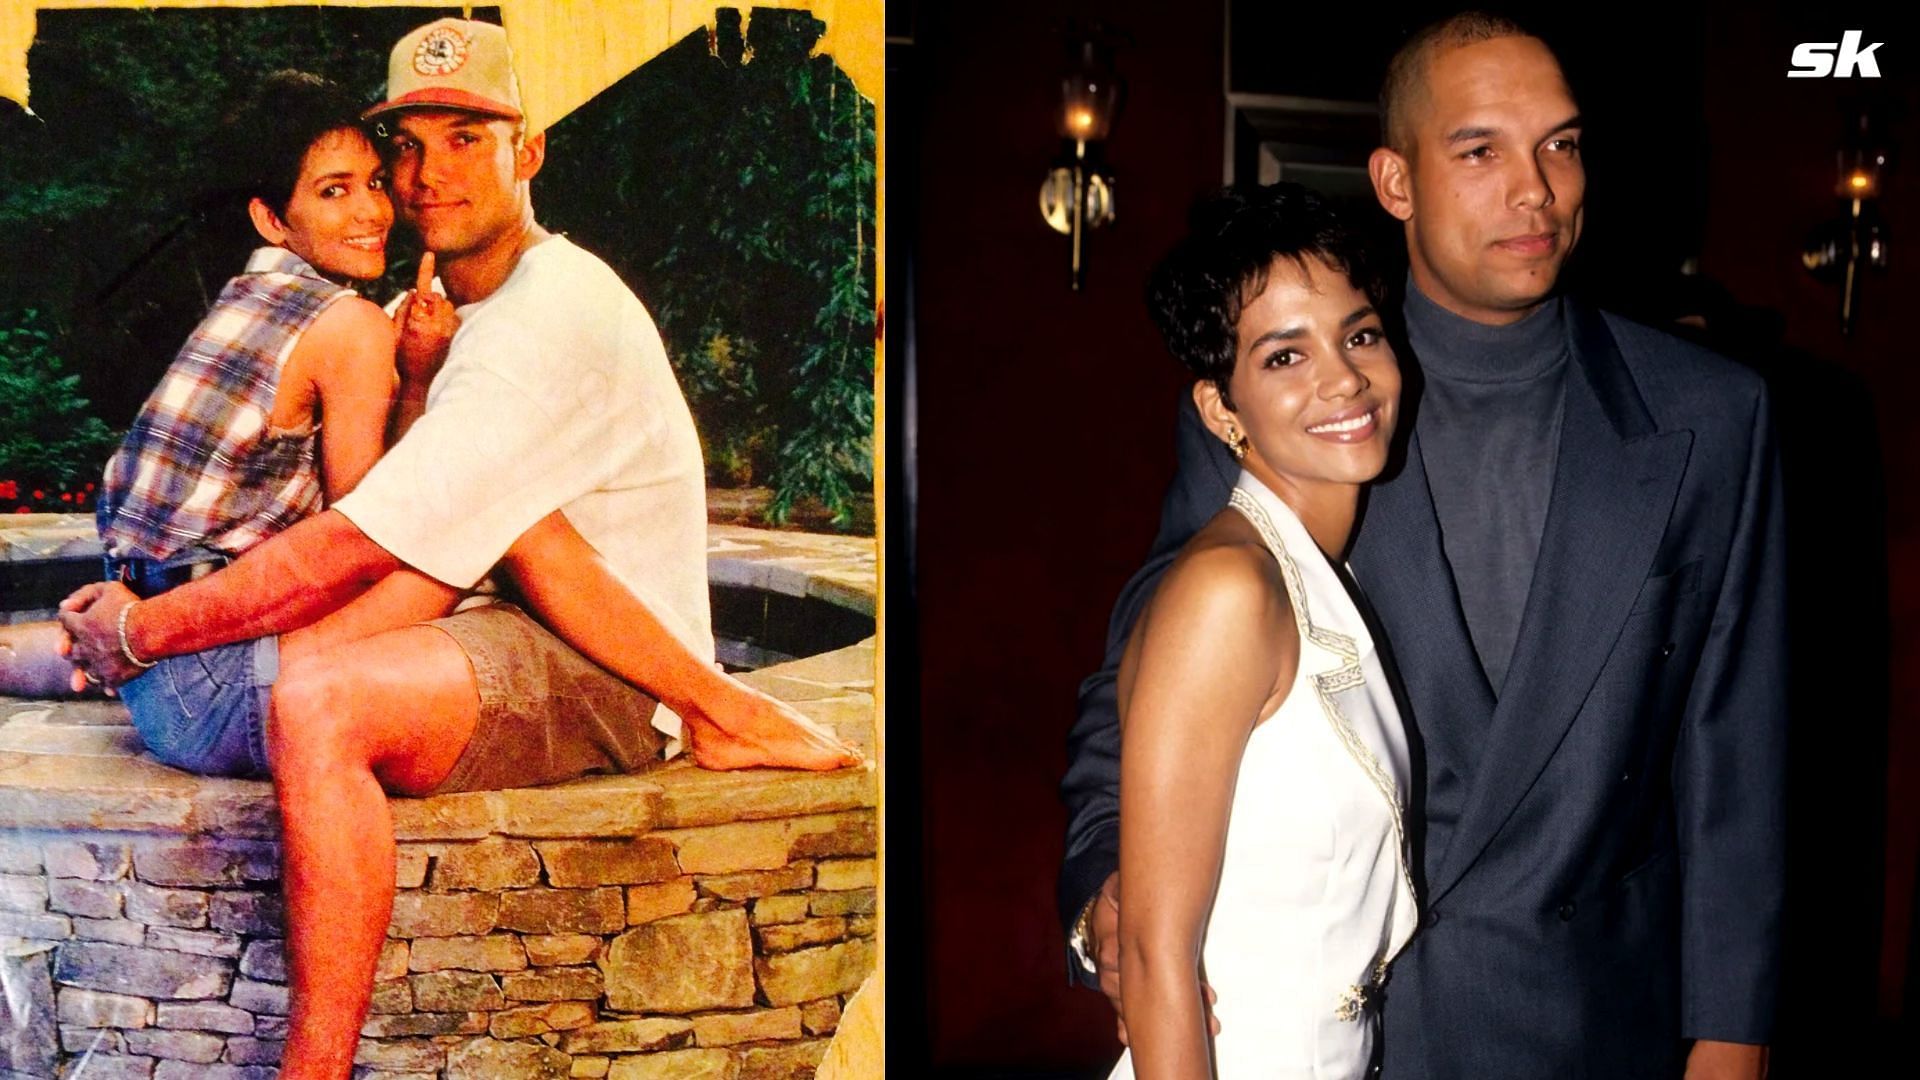 David Justice On Halle Berry: David Justice Never Hit Halle, Period